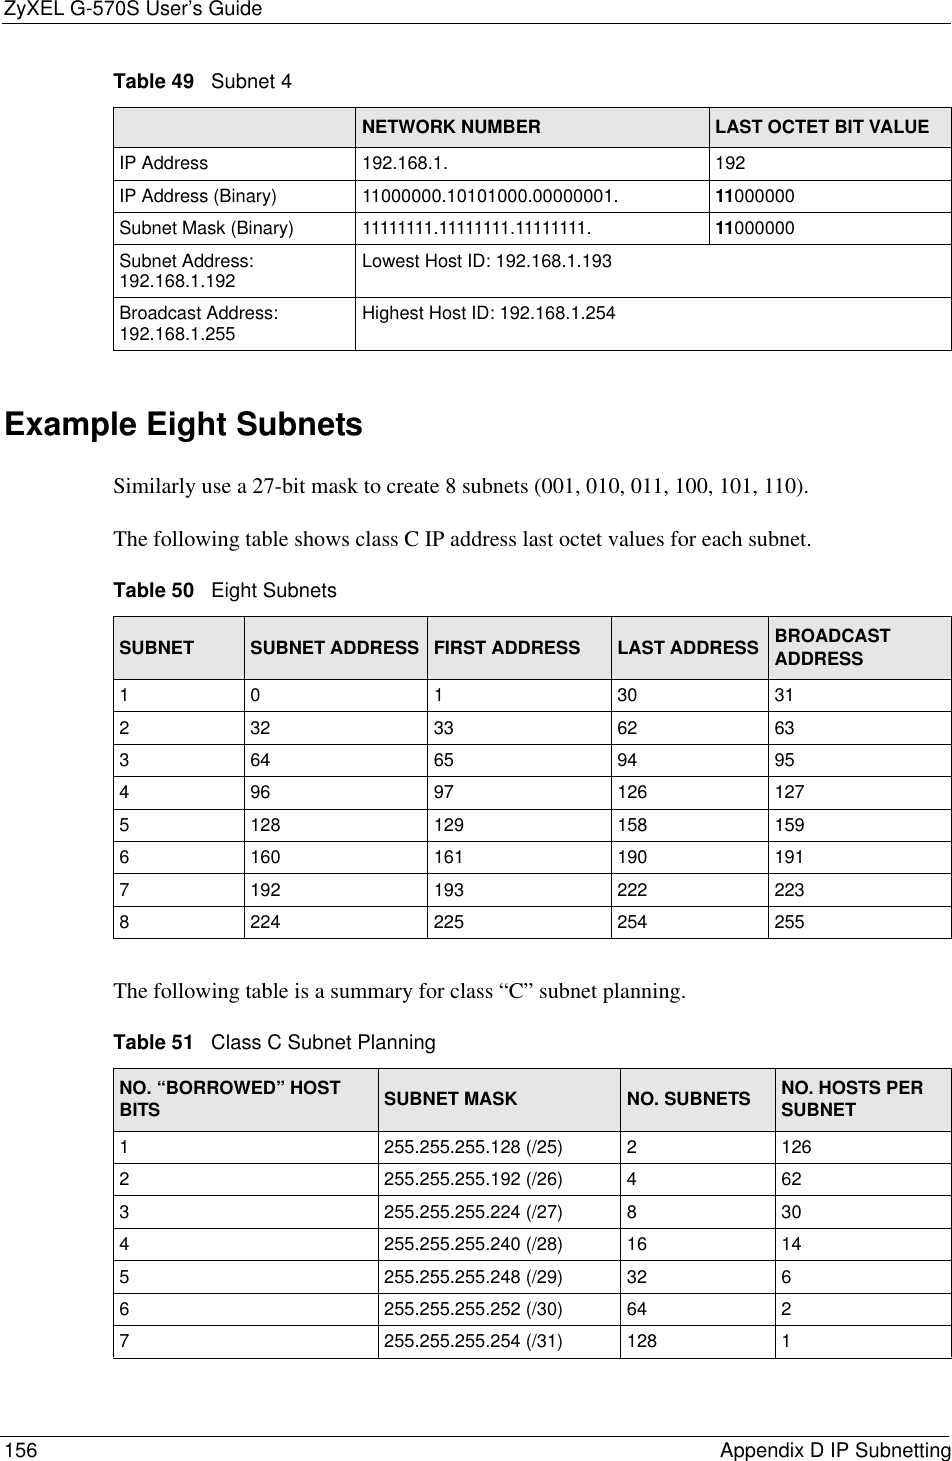 ZyXEL G-570S User’s Guide156 Appendix D IP SubnettingExample Eight SubnetsSimilarly use a 27-bit mask to create 8 subnets (001, 010, 011, 100, 101, 110). The following table shows class C IP address last octet values for each subnet.The following table is a summary for class “C” subnet planning.Table 49   Subnet 4NETWORK NUMBER LAST OCTET BIT VALUEIP Address 192.168.1. 192IP Address (Binary) 11000000.10101000.00000001. 11000000Subnet Mask (Binary) 11111111.11111111.11111111. 11000000Subnet Address: 192.168.1.192 Lowest Host ID: 192.168.1.193Broadcast Address: 192.168.1.255 Highest Host ID: 192.168.1.254Table 50   Eight SubnetsSUBNET SUBNET ADDRESS FIRST ADDRESS LAST ADDRESS BROADCASTADDRESS1 0 1 30 31232 33 62 63364 65 94 95496 97 126 1275128 129 158 1596160 161 190 1917192 193 222 2238224 225 254 255Table 51   Class C Subnet PlanningNO. “BORROWED” HOST BITS SUBNET MASK NO. SUBNETS NO. HOSTS PER SUBNET1255.255.255.128 (/25) 21262255.255.255.192 (/26) 4623255.255.255.224 (/27) 8304255.255.255.240 (/28) 16 145255.255.255.248 (/29) 32 66255.255.255.252 (/30) 64 27255.255.255.254 (/31) 128 1